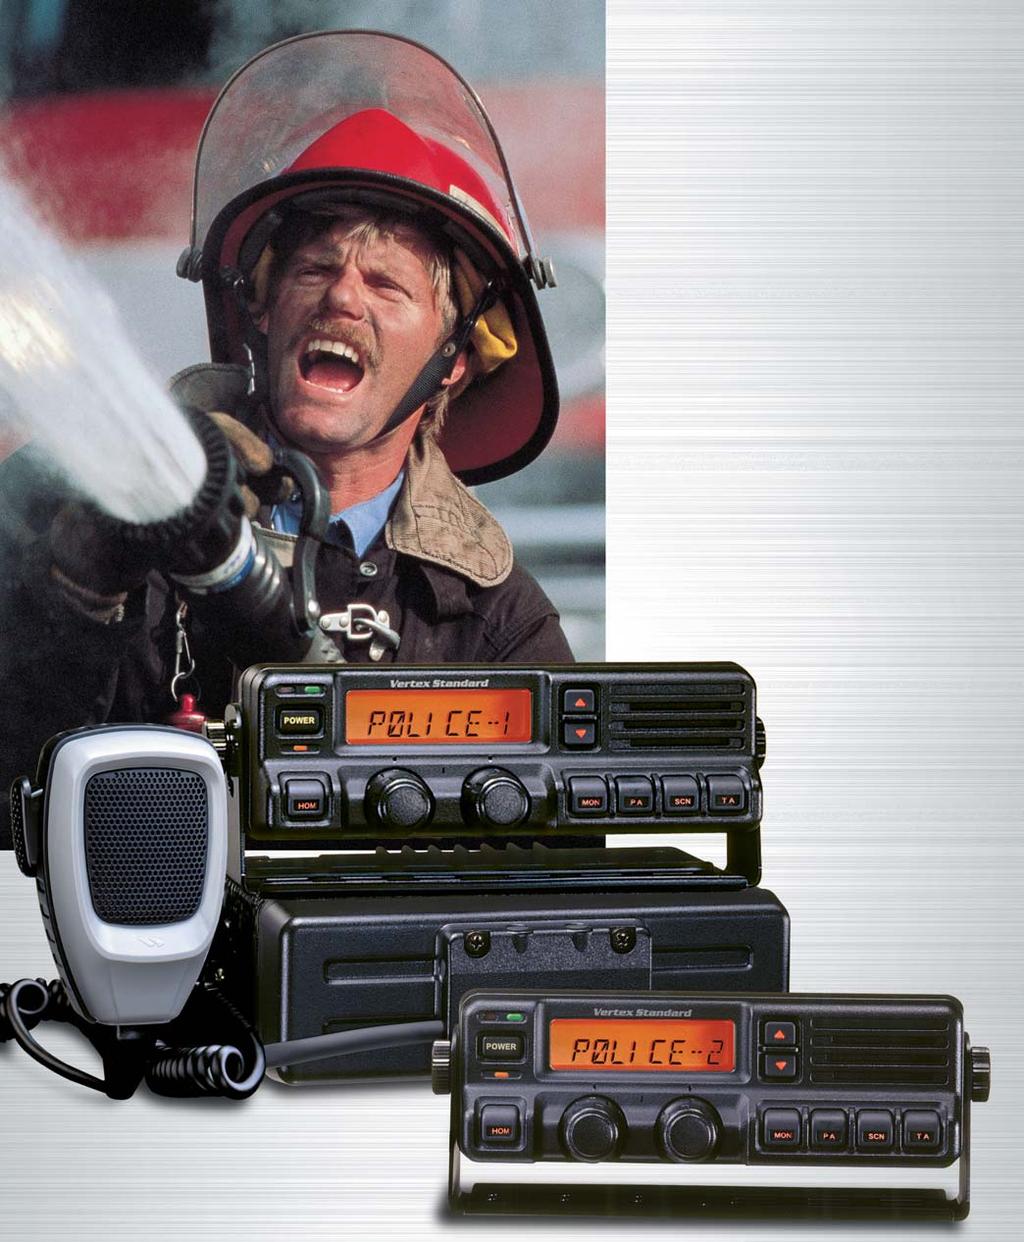 VX-4000 SERIES VHF/UHF Mobile Radios 250 CHANNEL CAPACITY POWER OUTPUT: 70 W (LOW BAND), 50 W (VHF), 40 W (UHF) MIL- STD 810 C/D/E 12.5 / 25 khz BANDWIDTH PROGRAMMABLE PER CHANNEL 2.